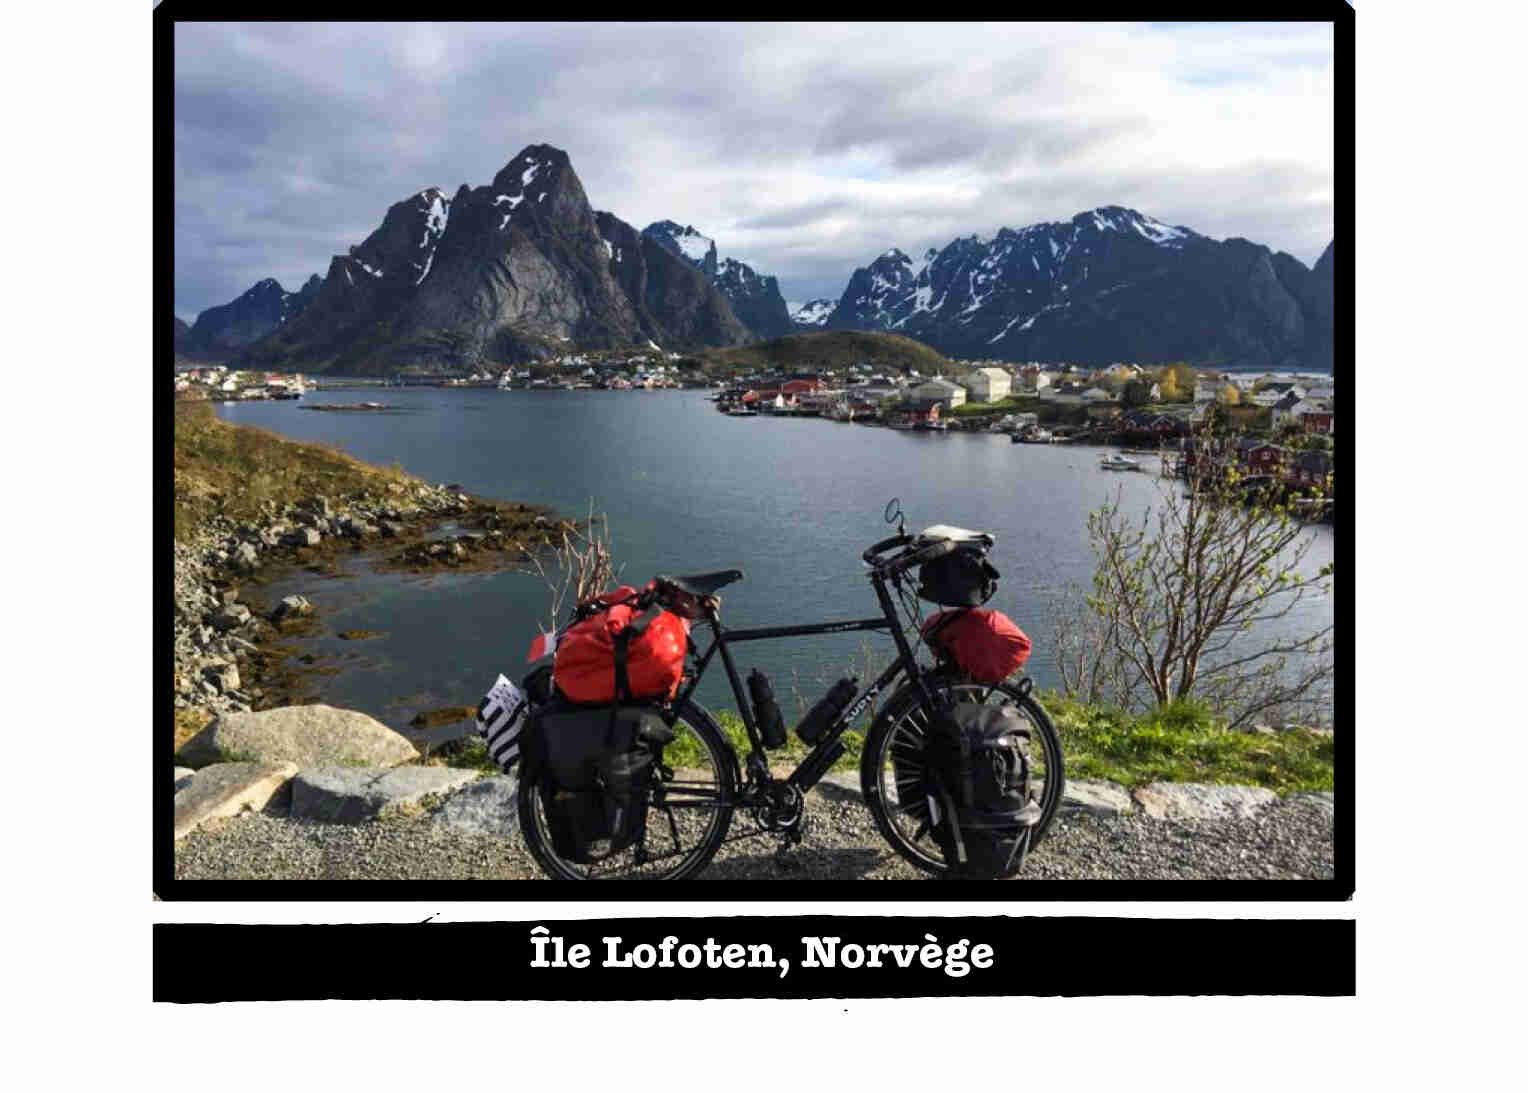 Right profile of a Surly bike, black, on the edge of a lake in the mountains - Ile Lofoten, Norvege tab below image